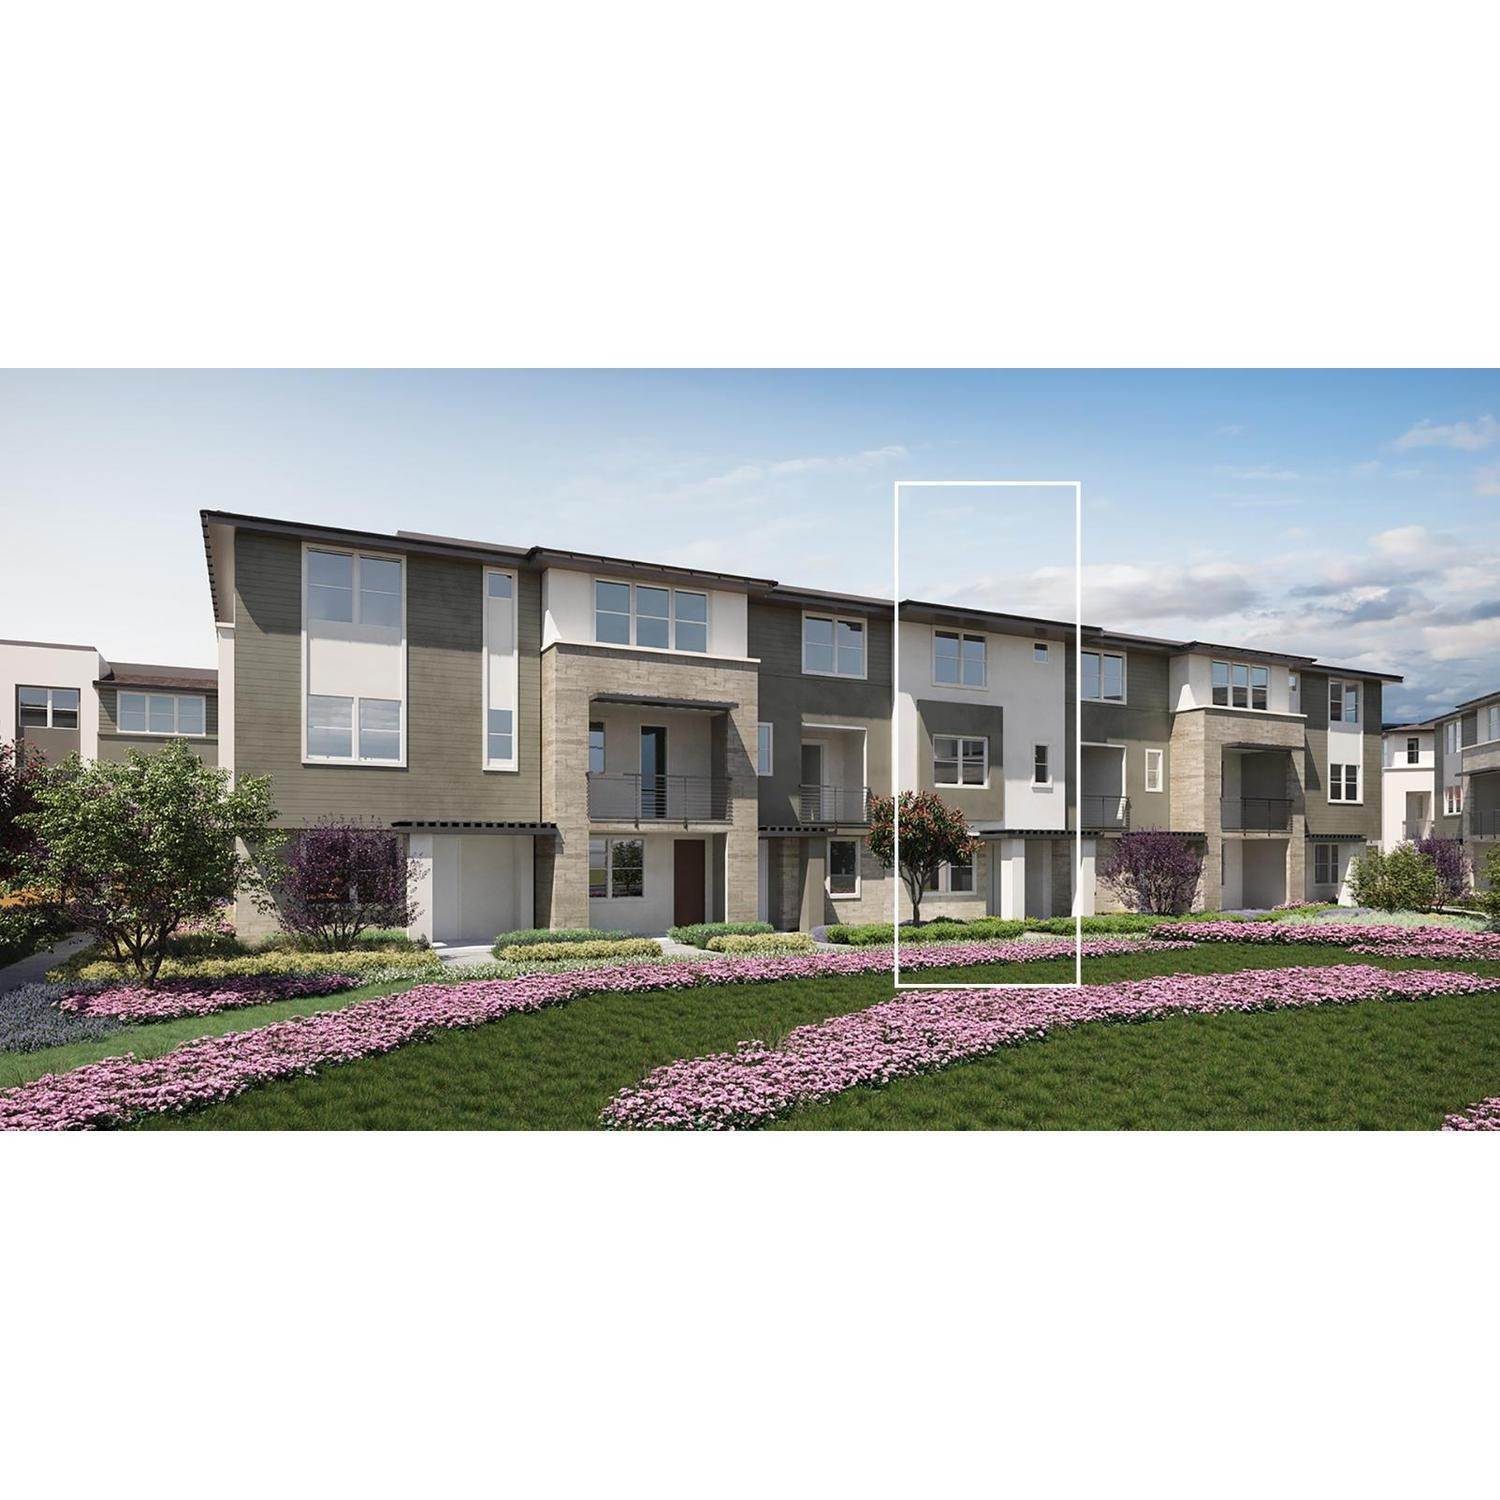 Multi Family for Active at Twin Oaks - Grove - Pampas 1 2000 Mateo Miller Circle SAN RAMON, CALIFORNIA 94583 UNITED STATES